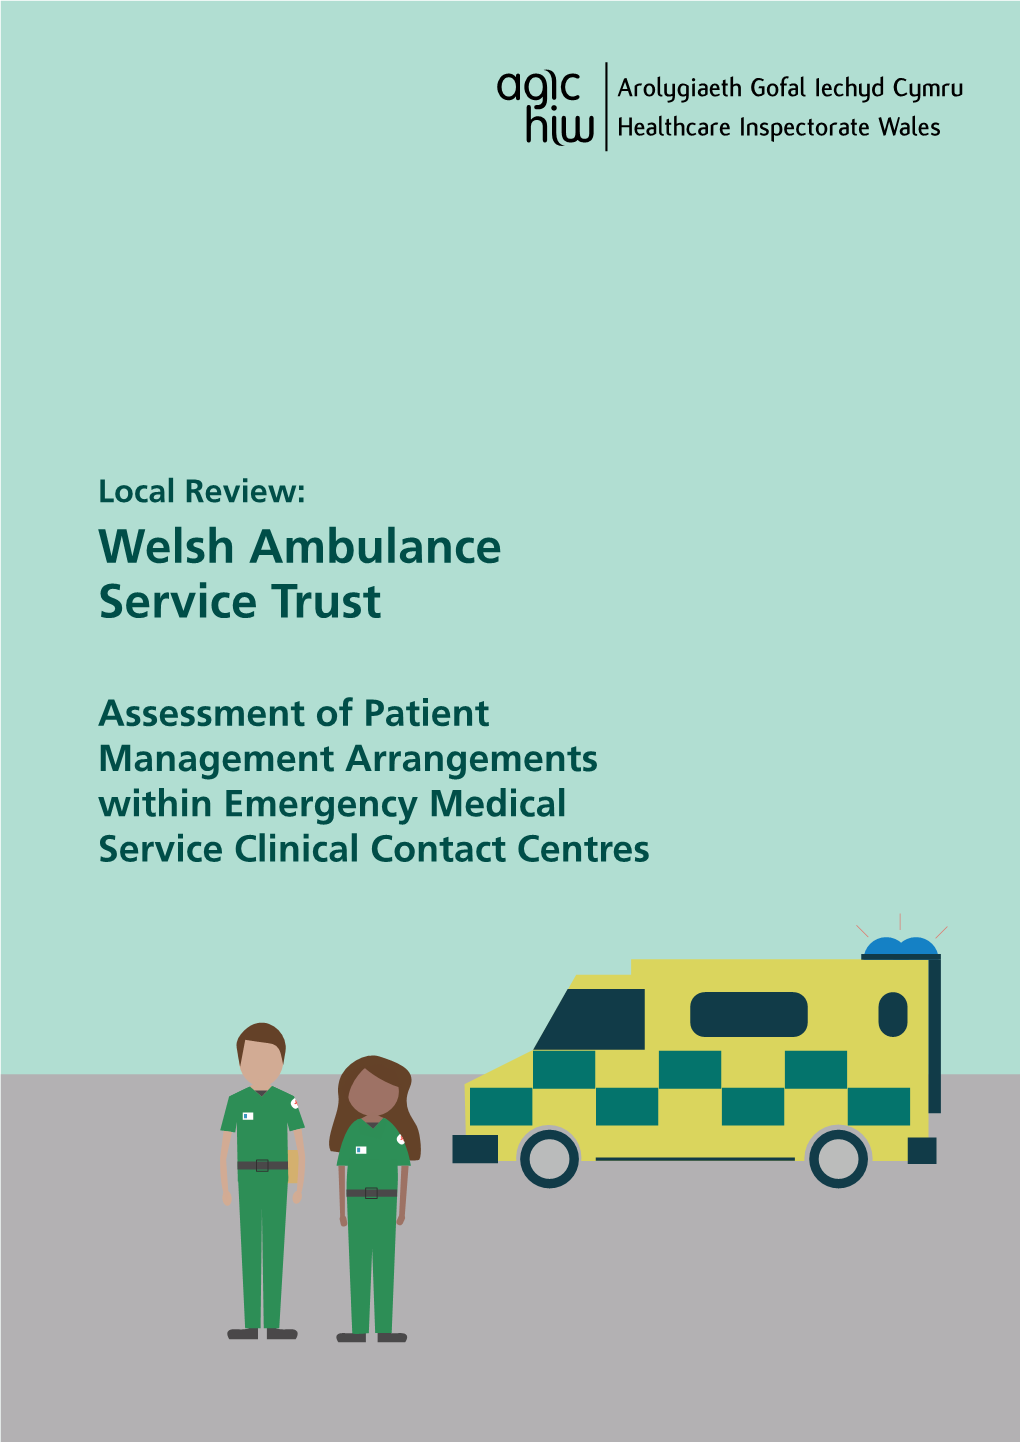 Local Review: Welsh Ambulance Service Trust